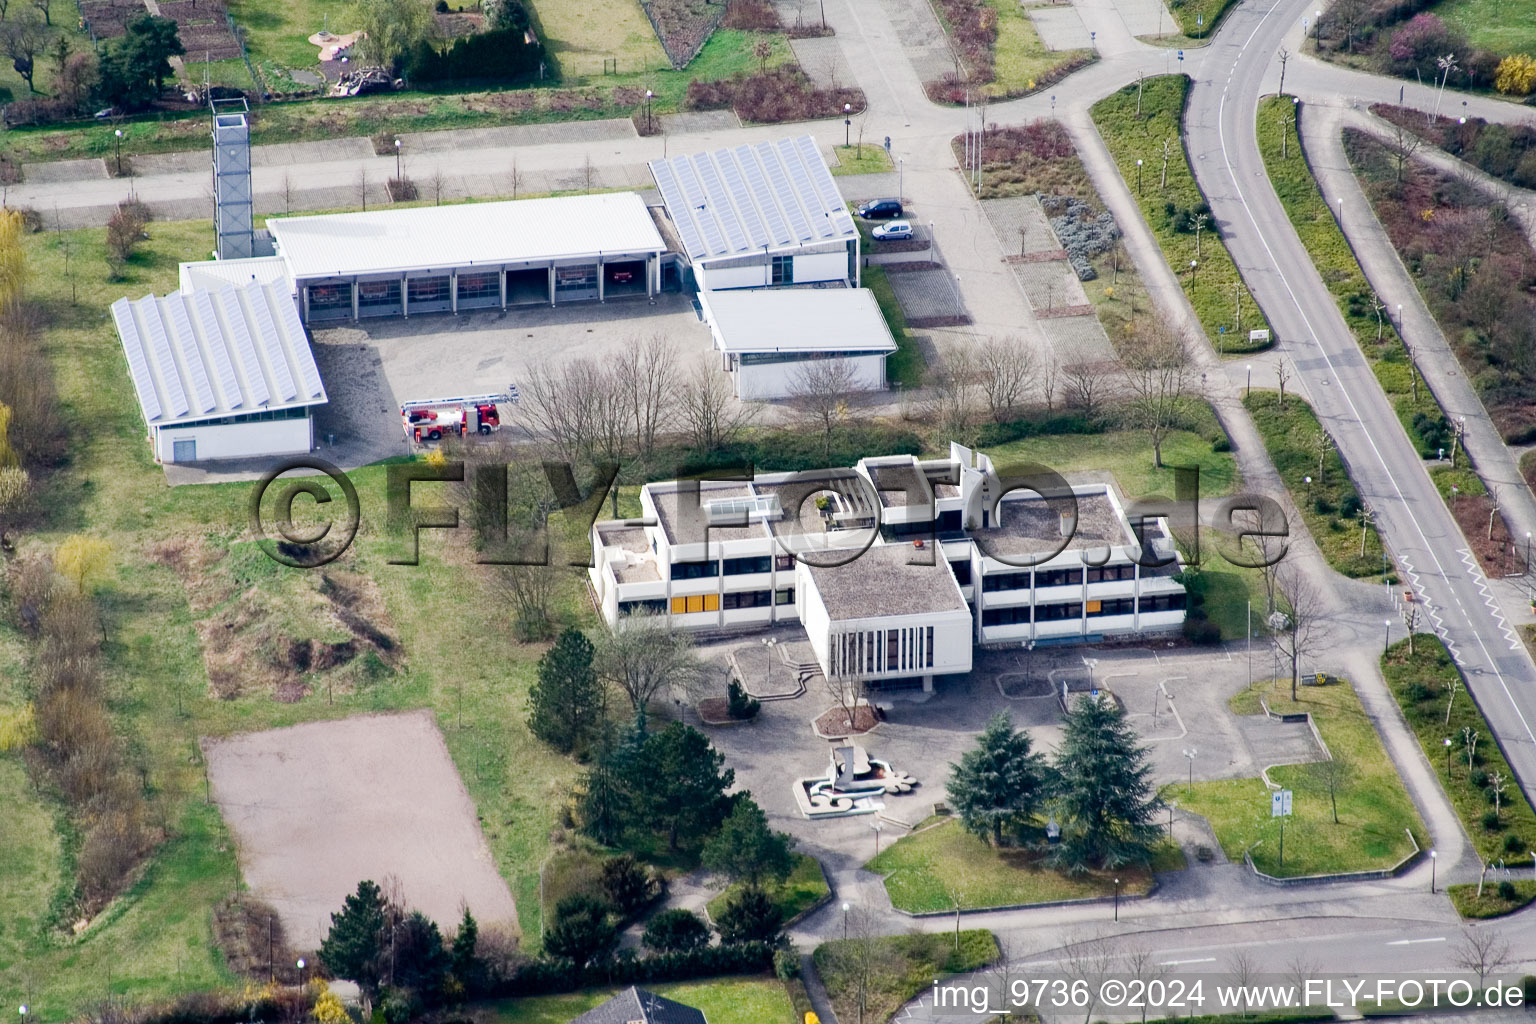 Aerial view of Association of Town Hall in Offenbach an der Queich in the state Rhineland-Palatinate, Germany